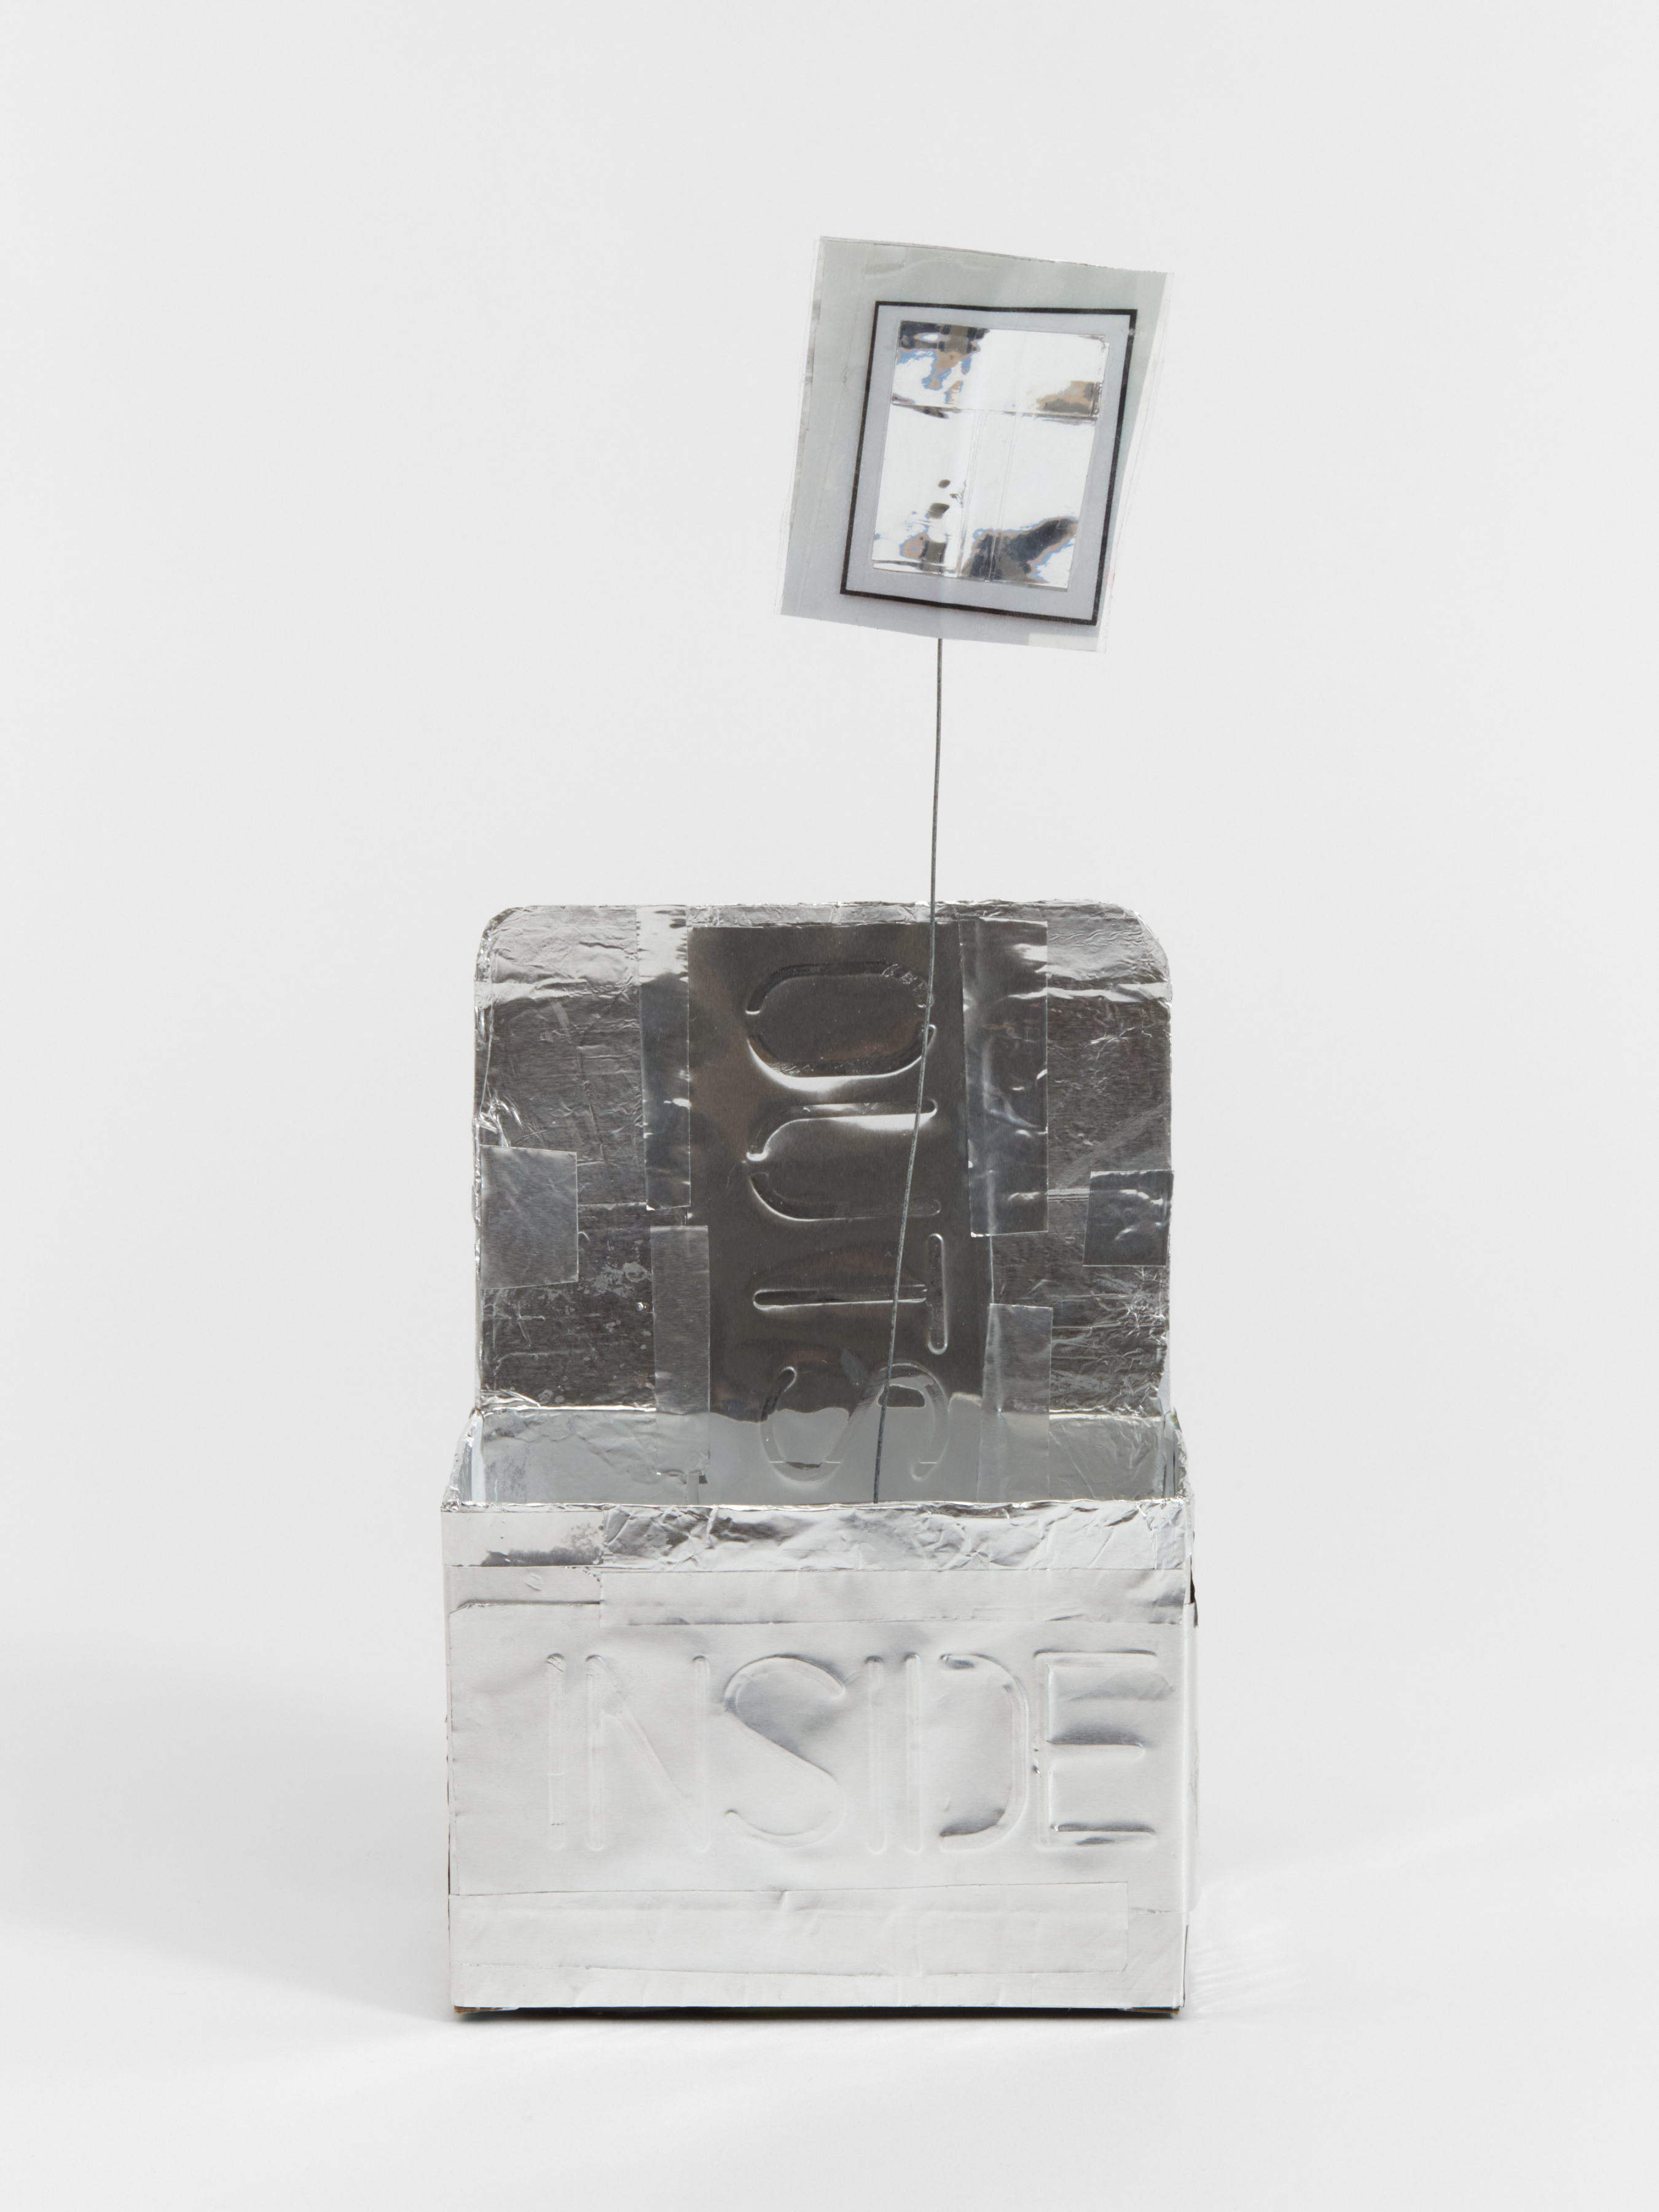 A box like sculpture with a mirror on a wire emerging from the cavity coated in a reflective material with the words "inside" and "out" embossed on the surface. 